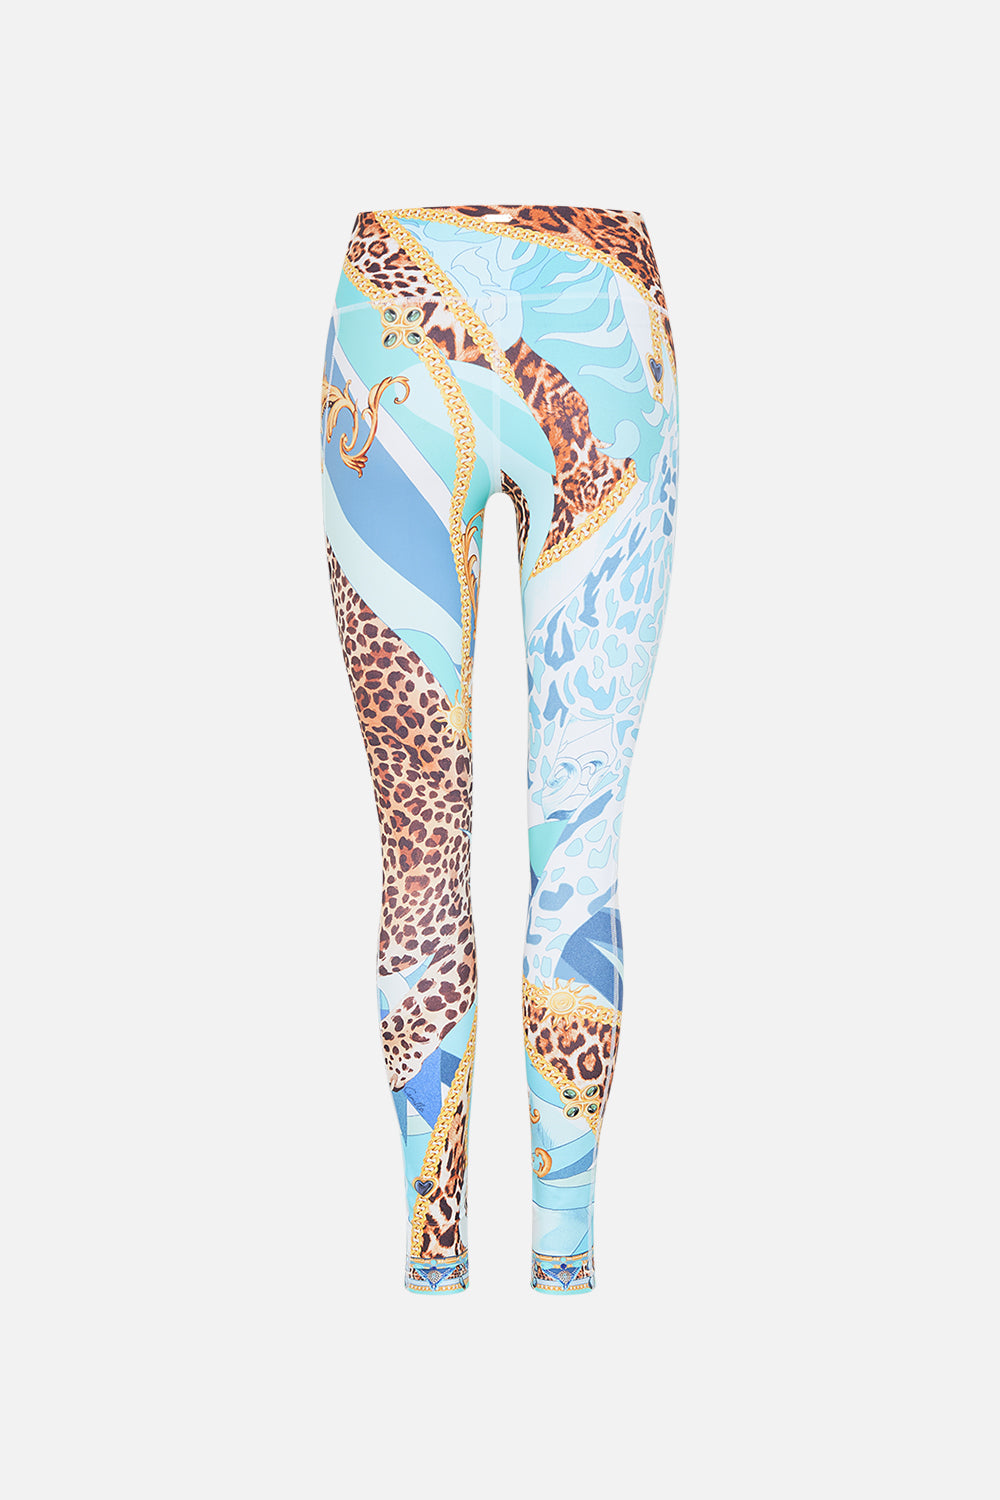 ACTIVE LEGGING WITH SIDE POCKET SKY CHEETAH